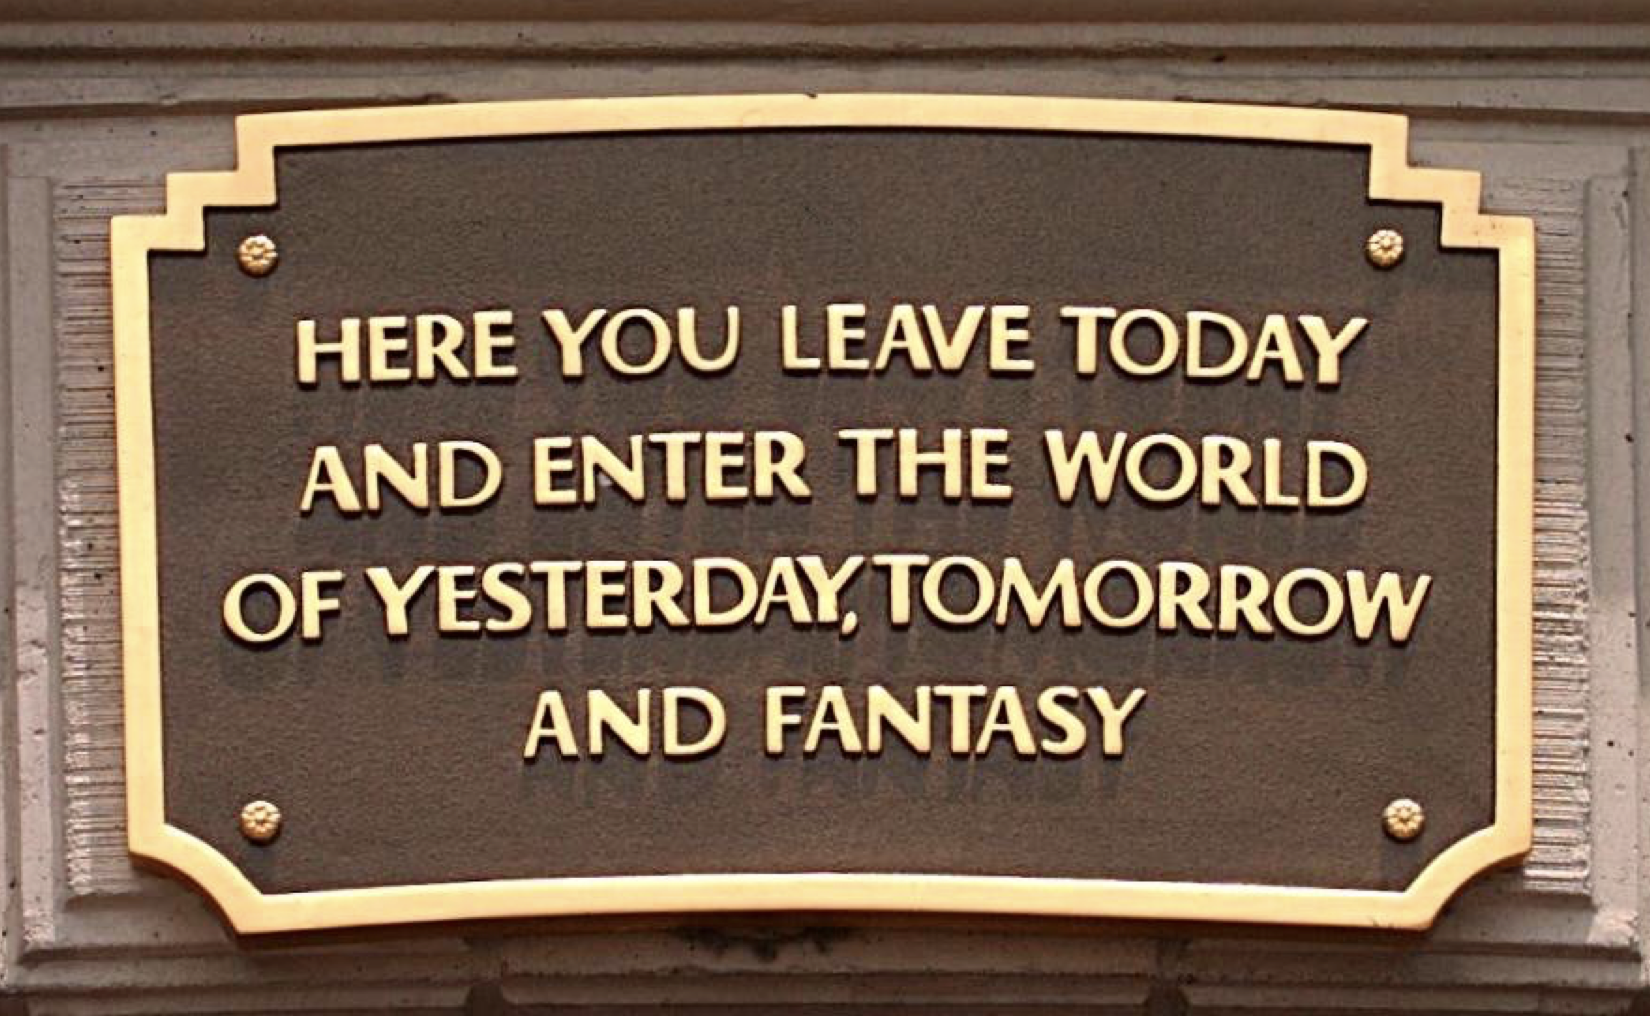 Photo of the plaque on Disneyland's entrance